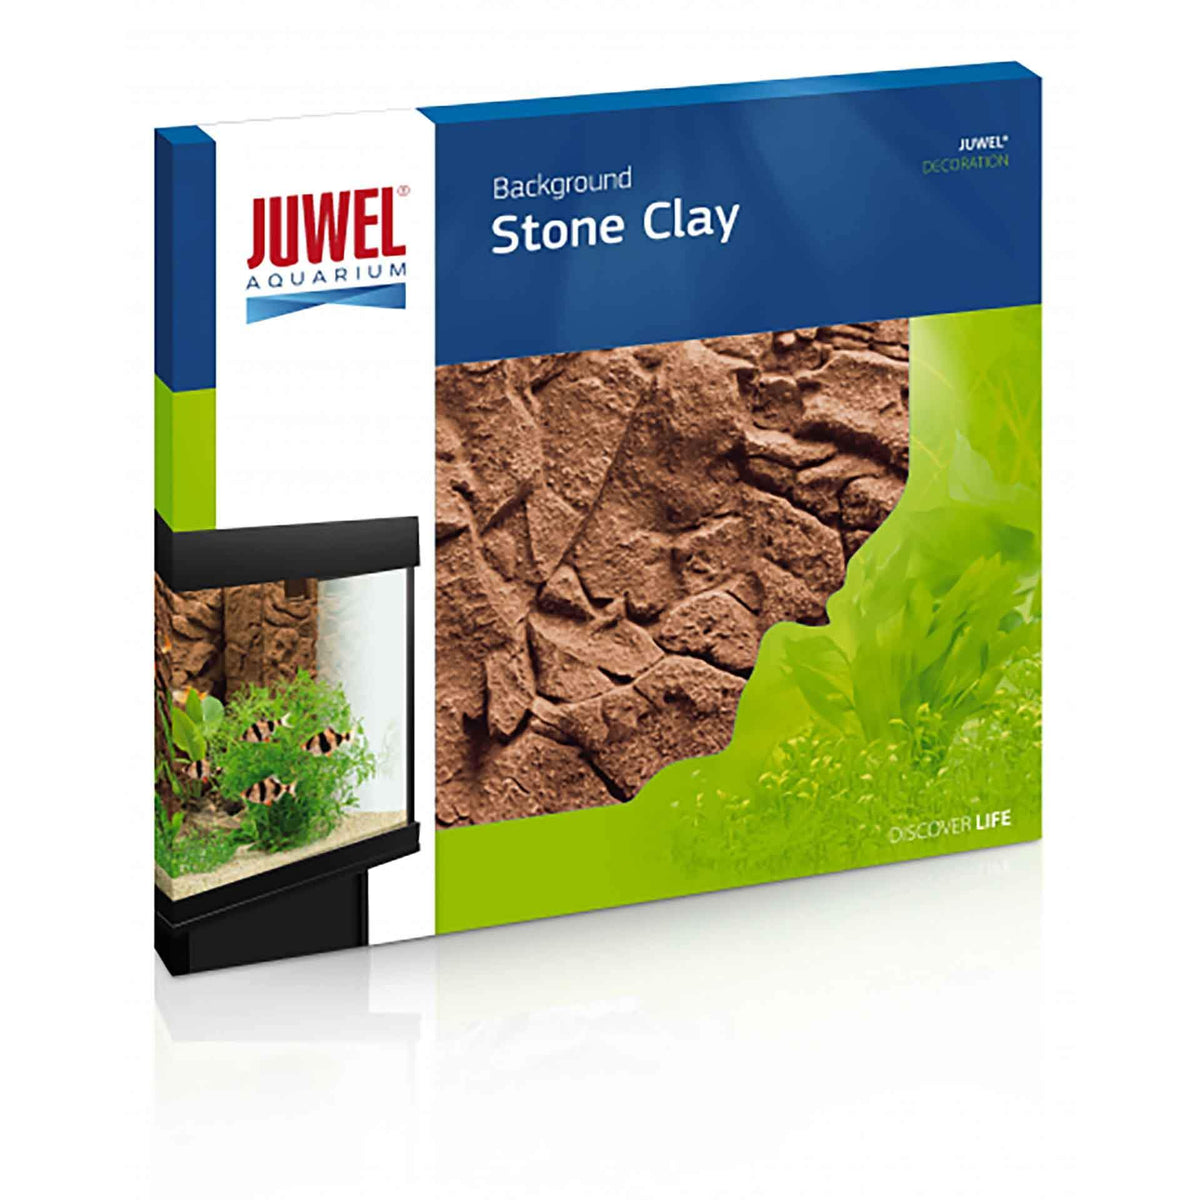 Juwel Background Stone Clay - 60x55cm - In store pickup only